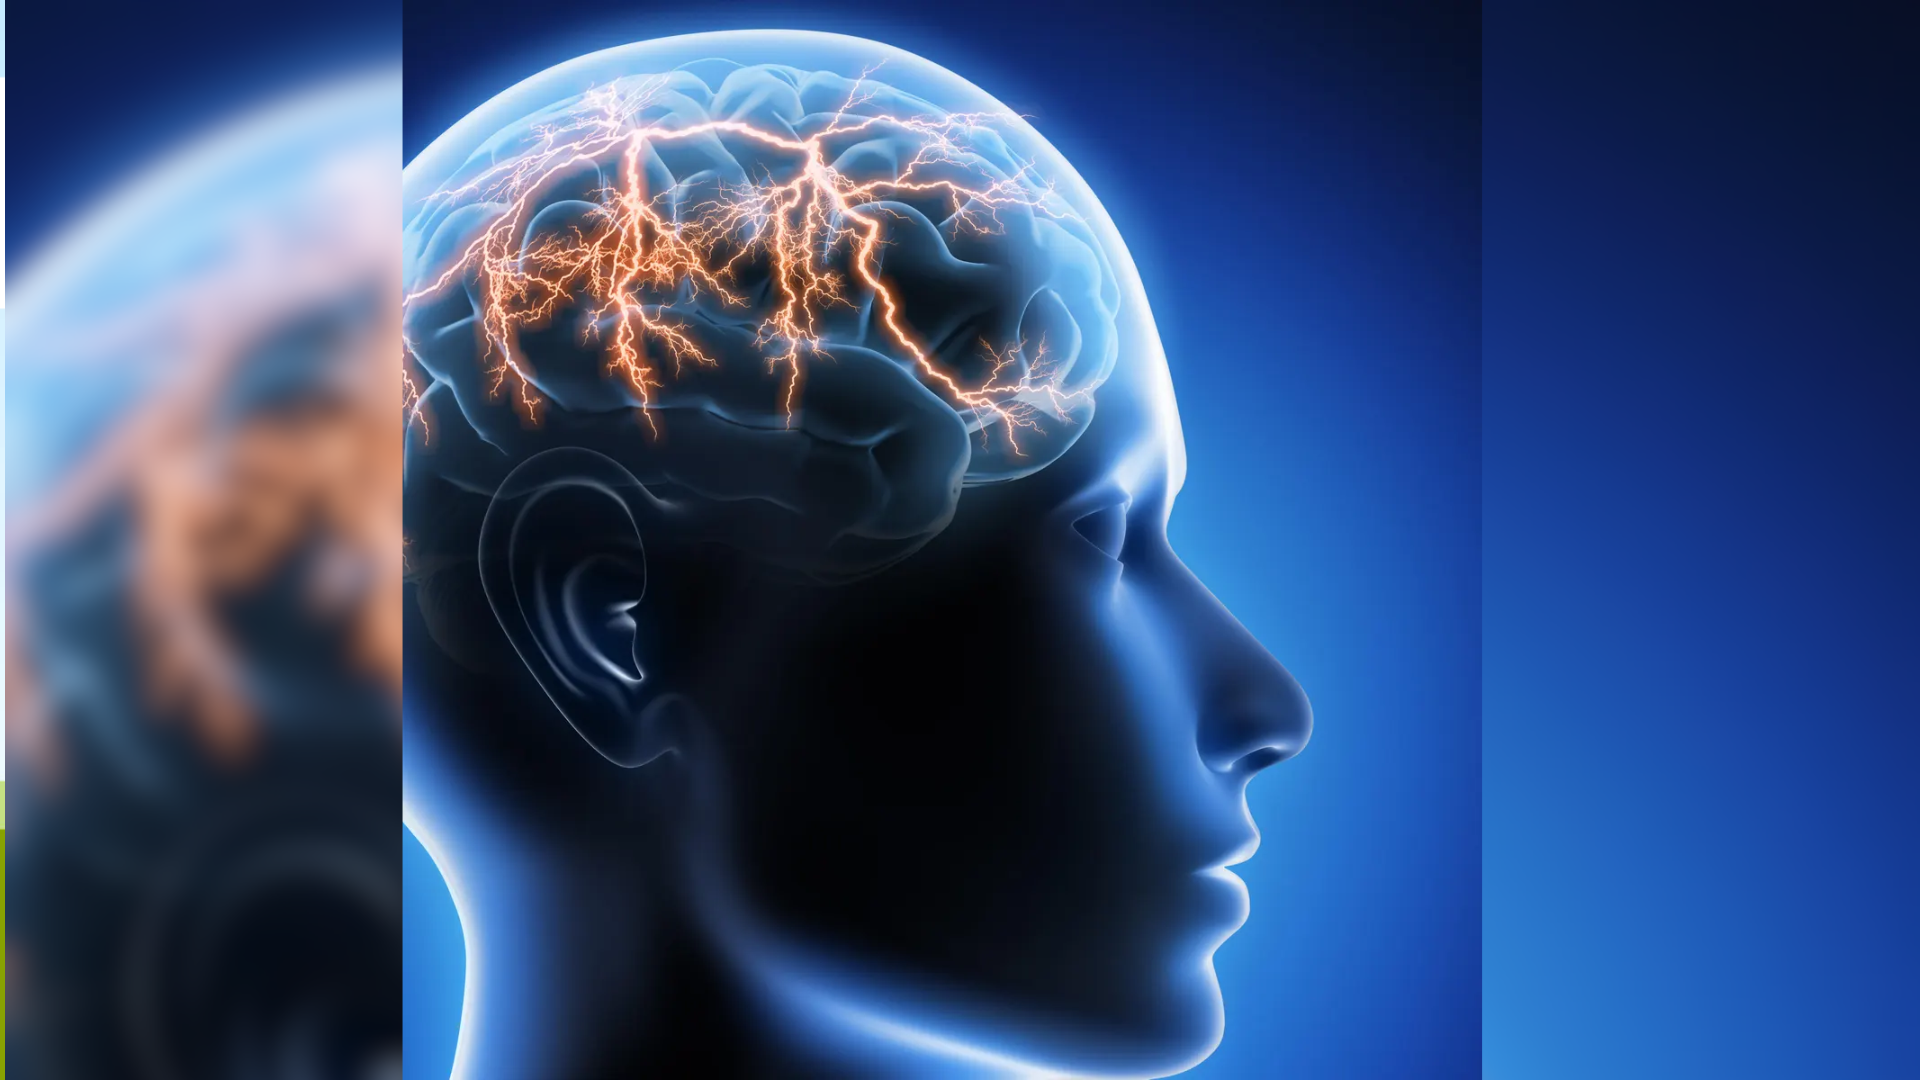 WHO Study Reveals Over 3 Billion Affected by Neurological Conditions